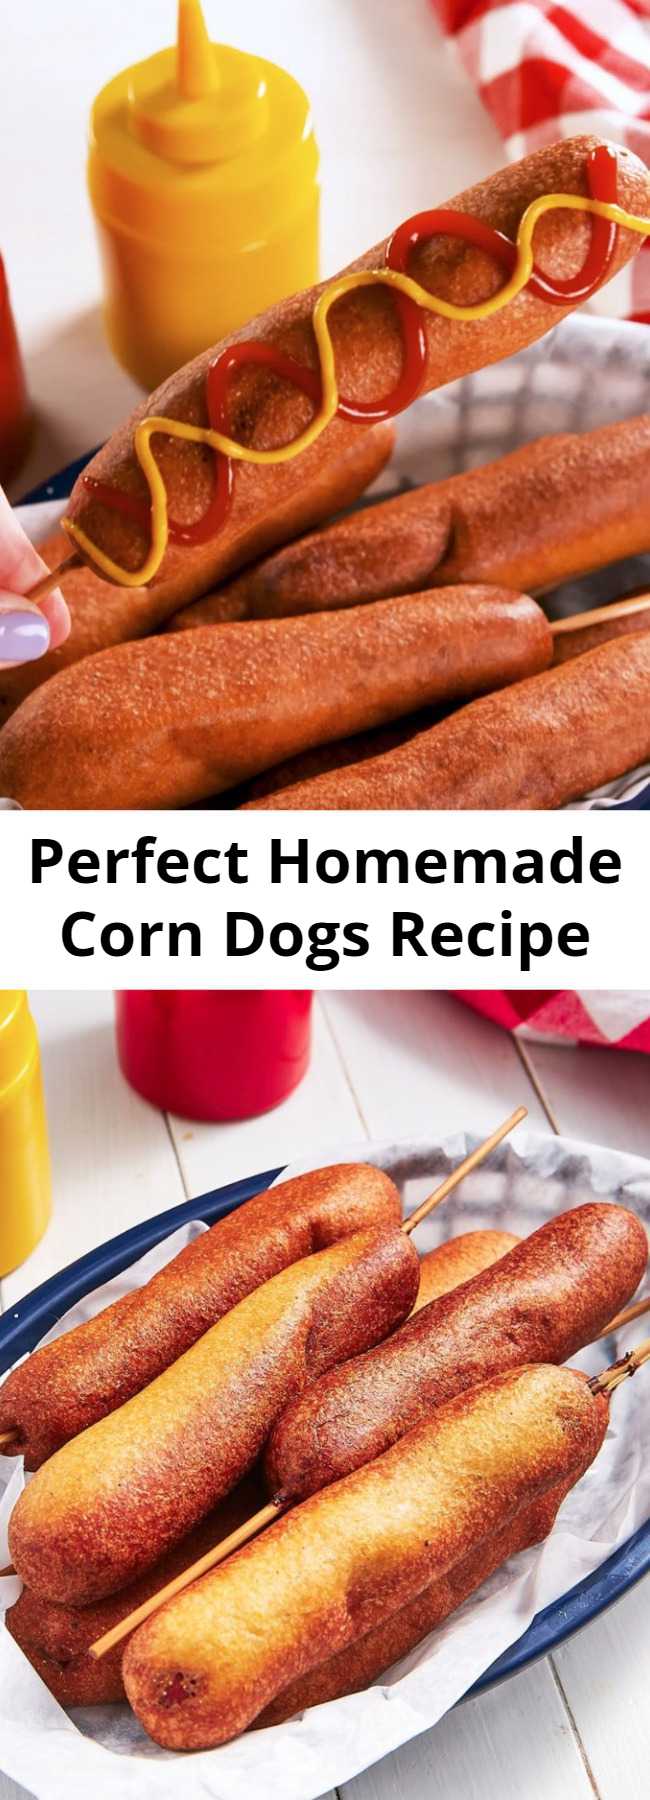 Perfect Homemade Corn Dogs Recipe - No one can deny the crispy, slightly sweet, perfectly fried lure of a corn dog. A corn dog and a giant funnel cake and we are all set. Luckily, both are actually super easy to make at home and a corn dog comes together in no time flat. The batter fries up quickly and perfectly crispy for the best corn dog ever. SOOOO much better than the boxed kind. #easy #recipe #corndog #hotdog #fried #golden #homemade #fromscratch #buttermilk